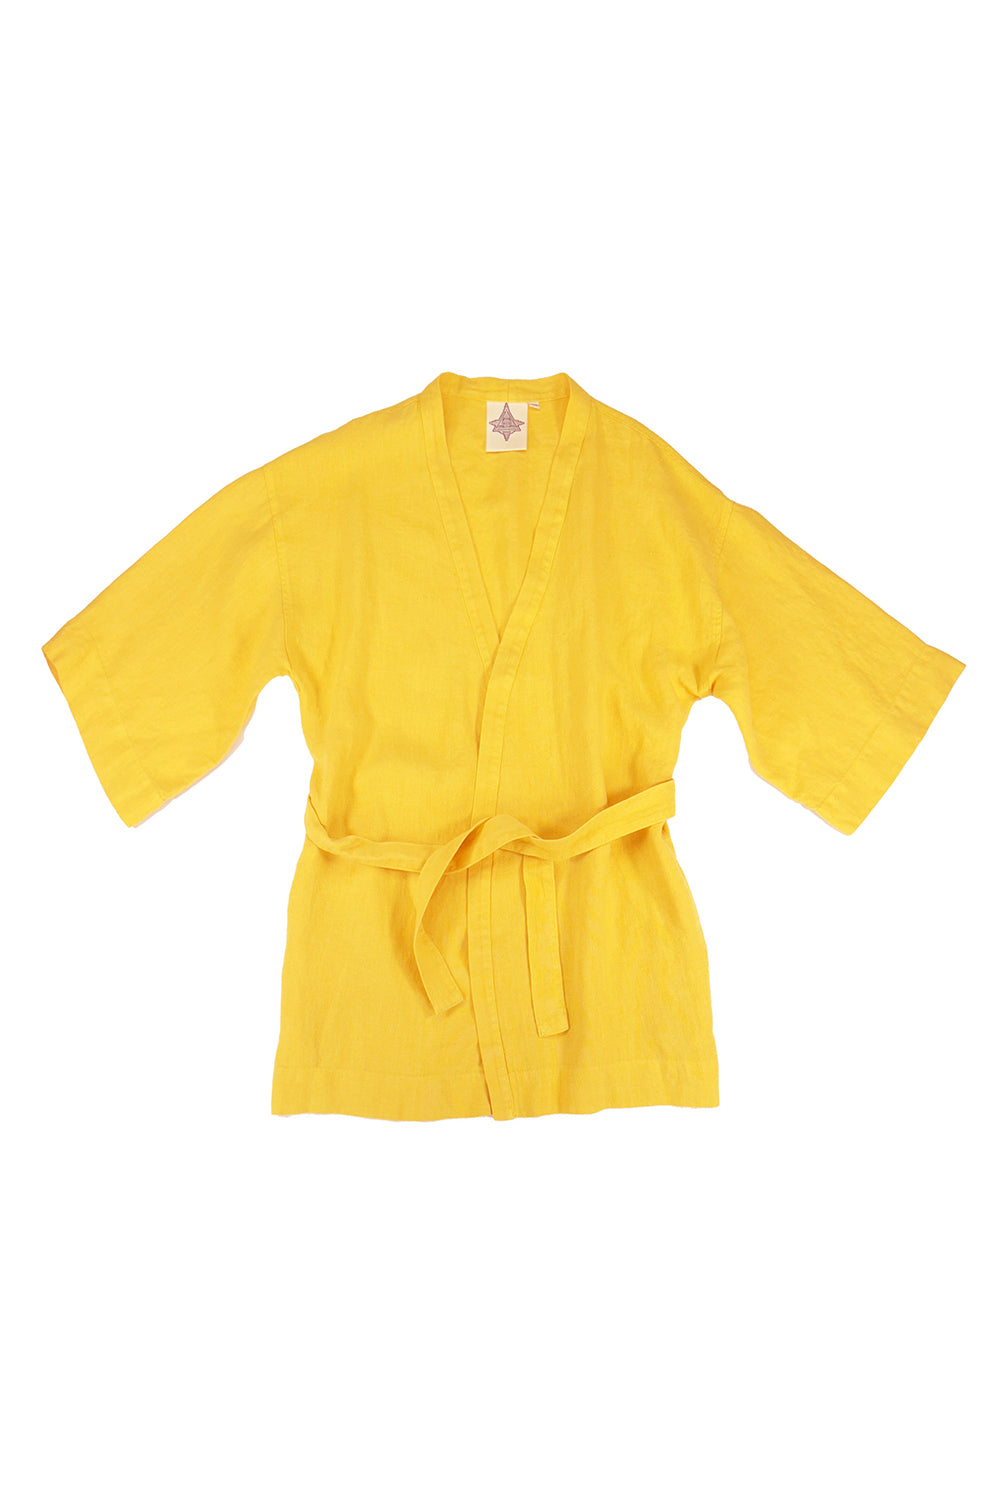 Bali Cover-up | Jungmaven Hemp Clothing & Accessories / Color: Sunshine Yellow